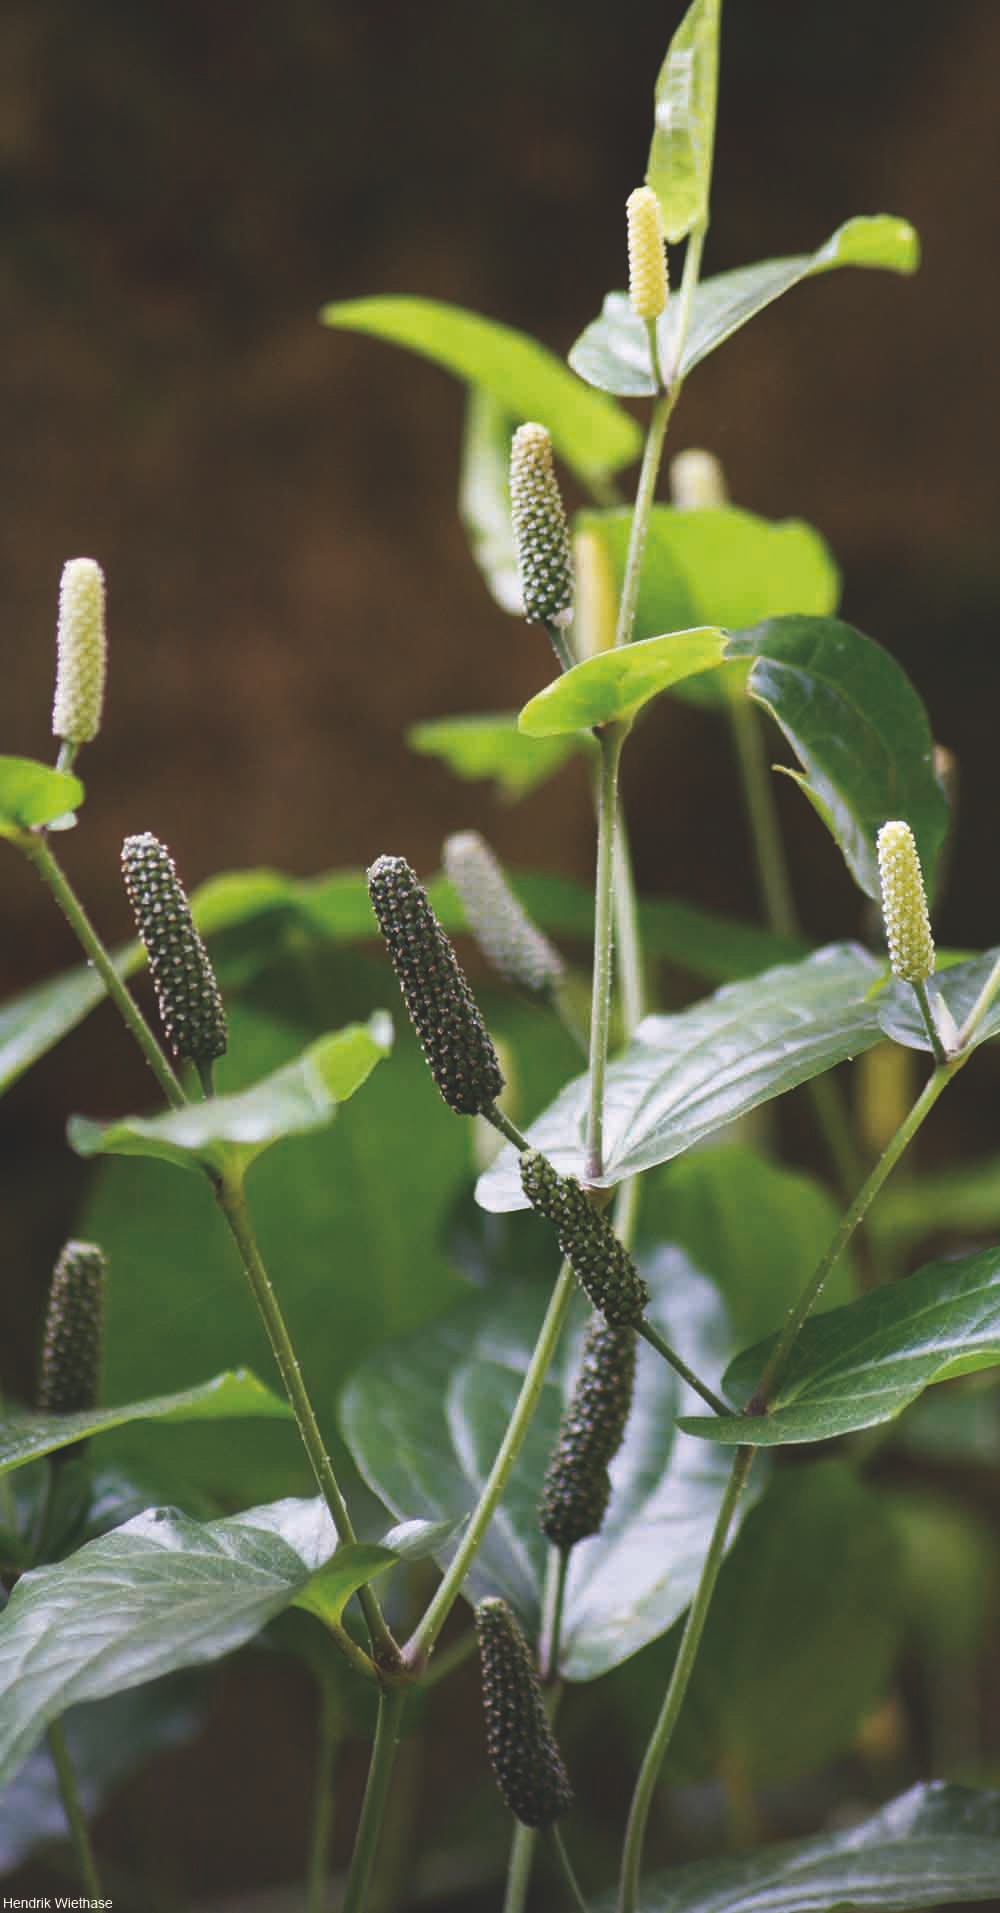 long pepper plants growing in India